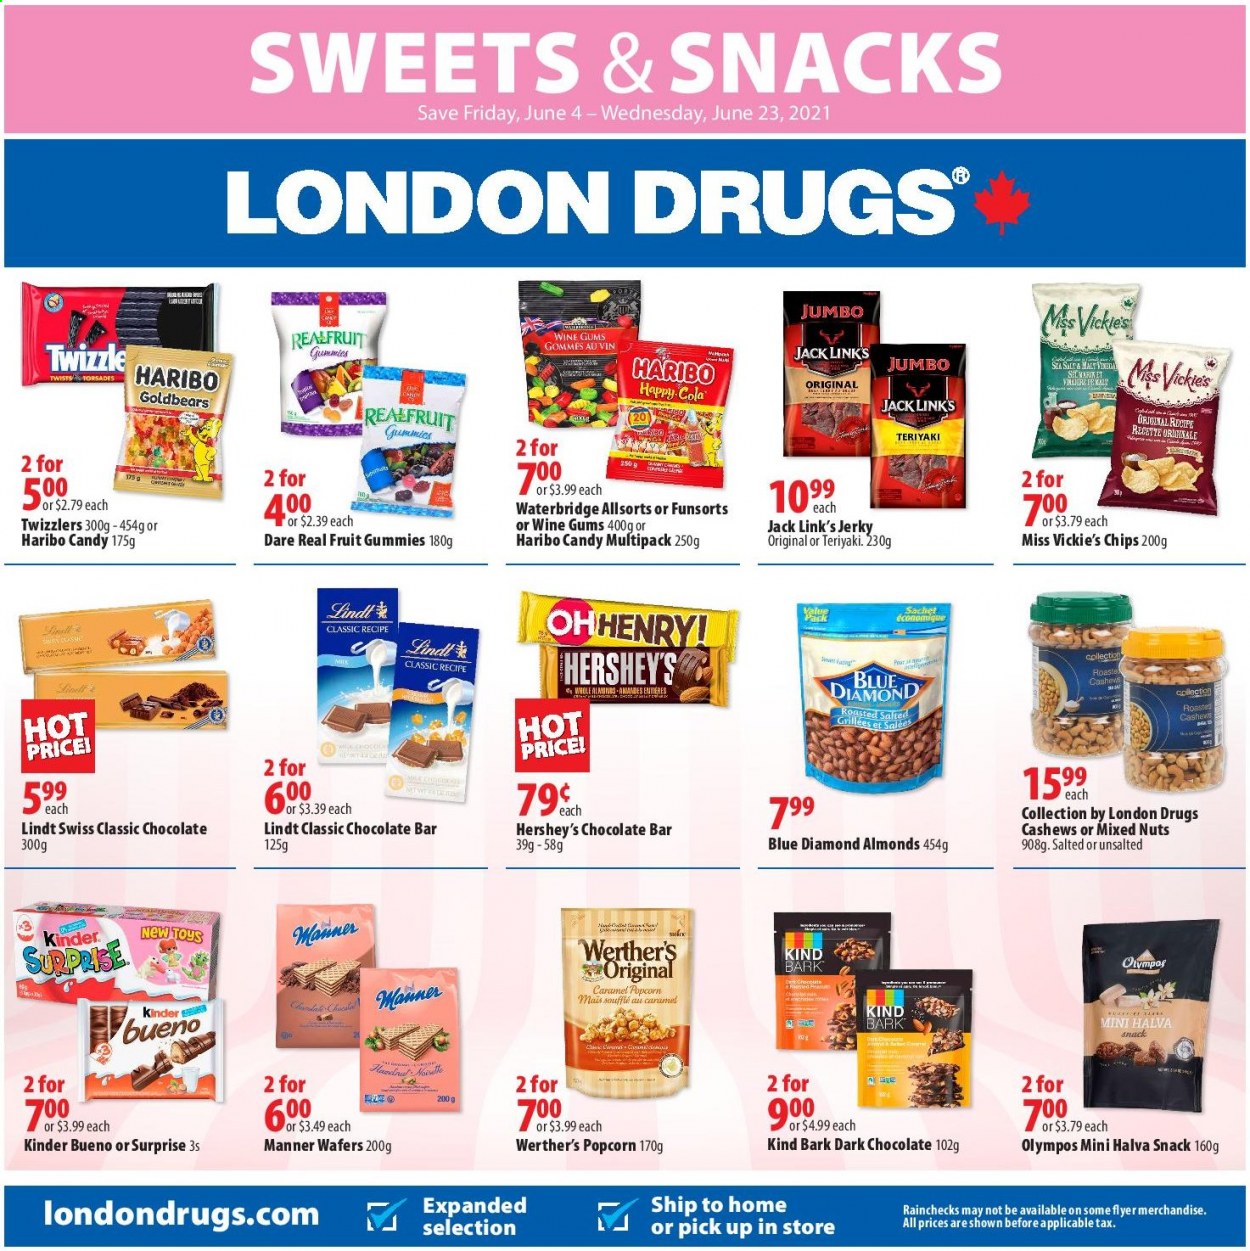 thumbnail - London Drugs Flyer - June 04, 2021 - June 23, 2021 - Sales products - wafers, Haribo, Hershey's, Kinder Bueno, dark chocolate, chocolate bar, popcorn, Jack Link's, caramel, almonds, cashews, mixed nuts, Blue Diamond, toys, chips. Page 1.